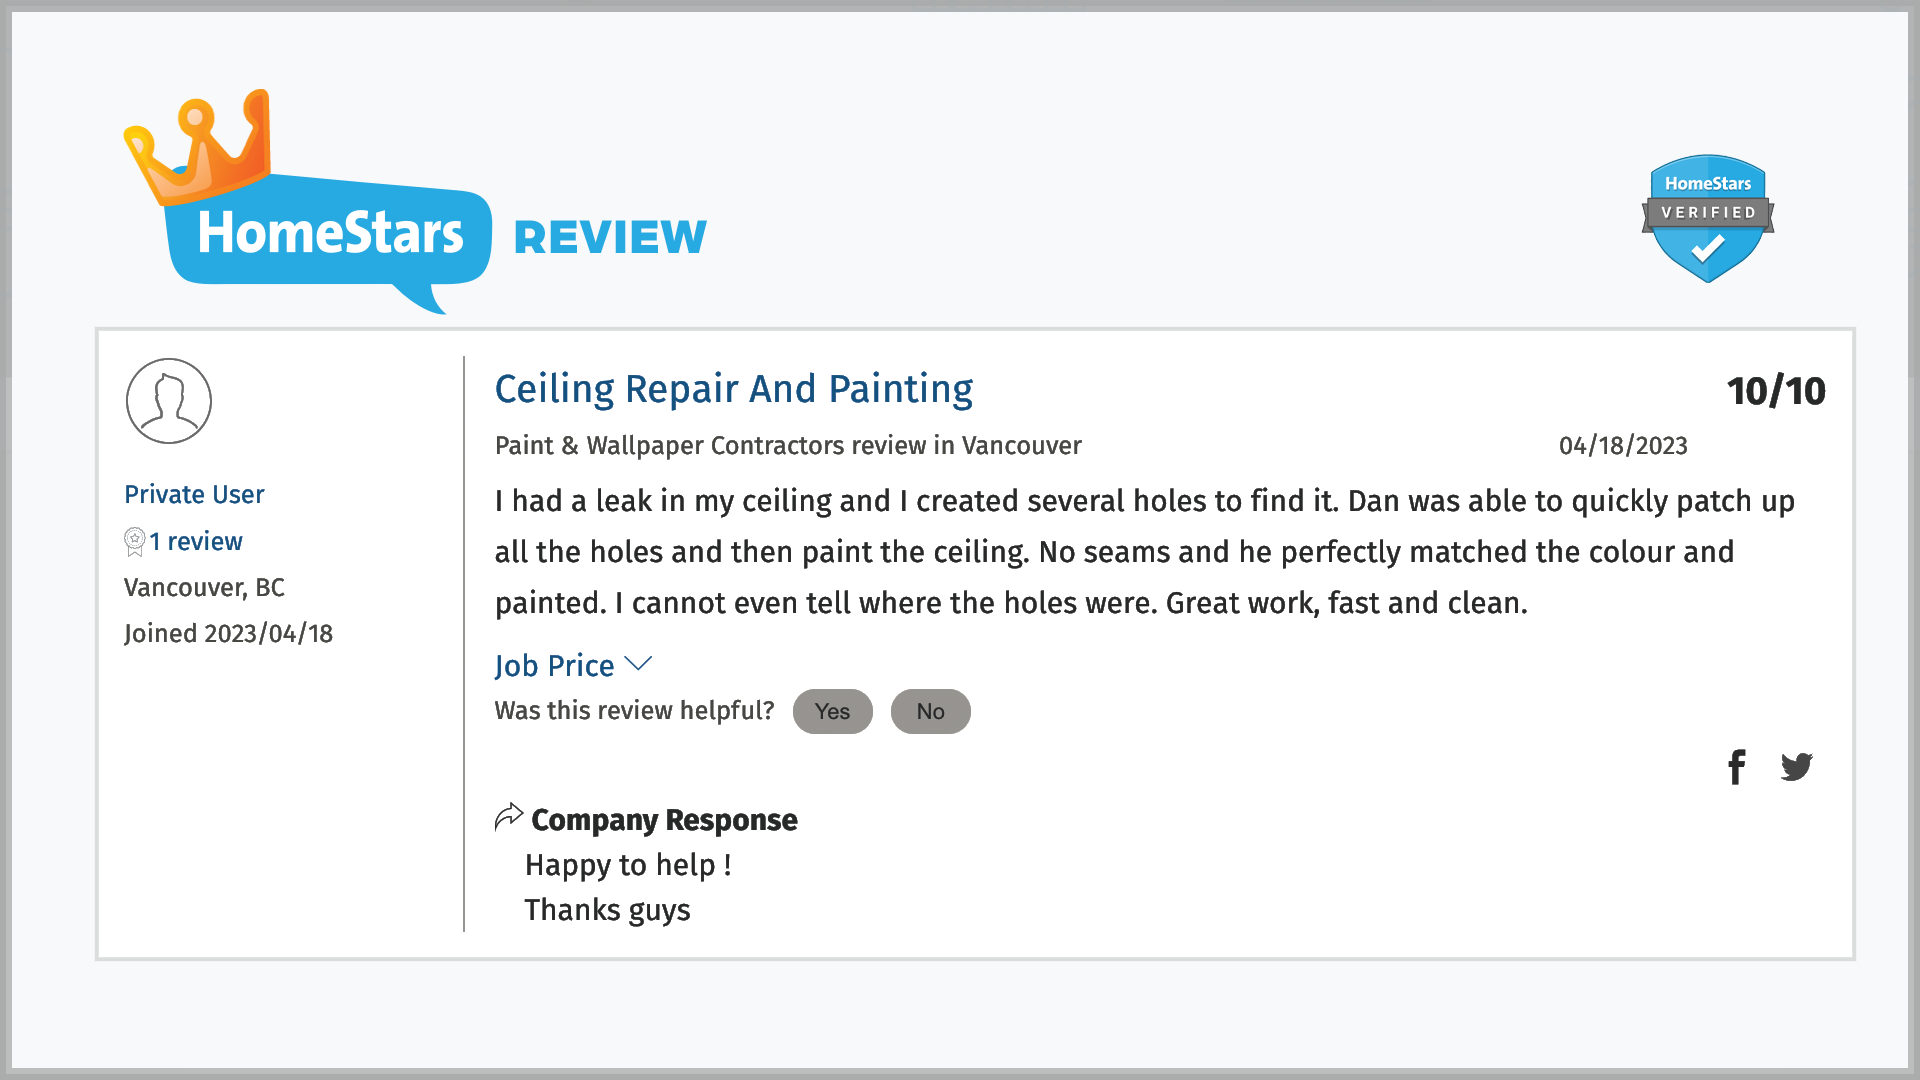 homestars-review-10-out-of-10-drywall-repairman-vancouver-bc-canada-5